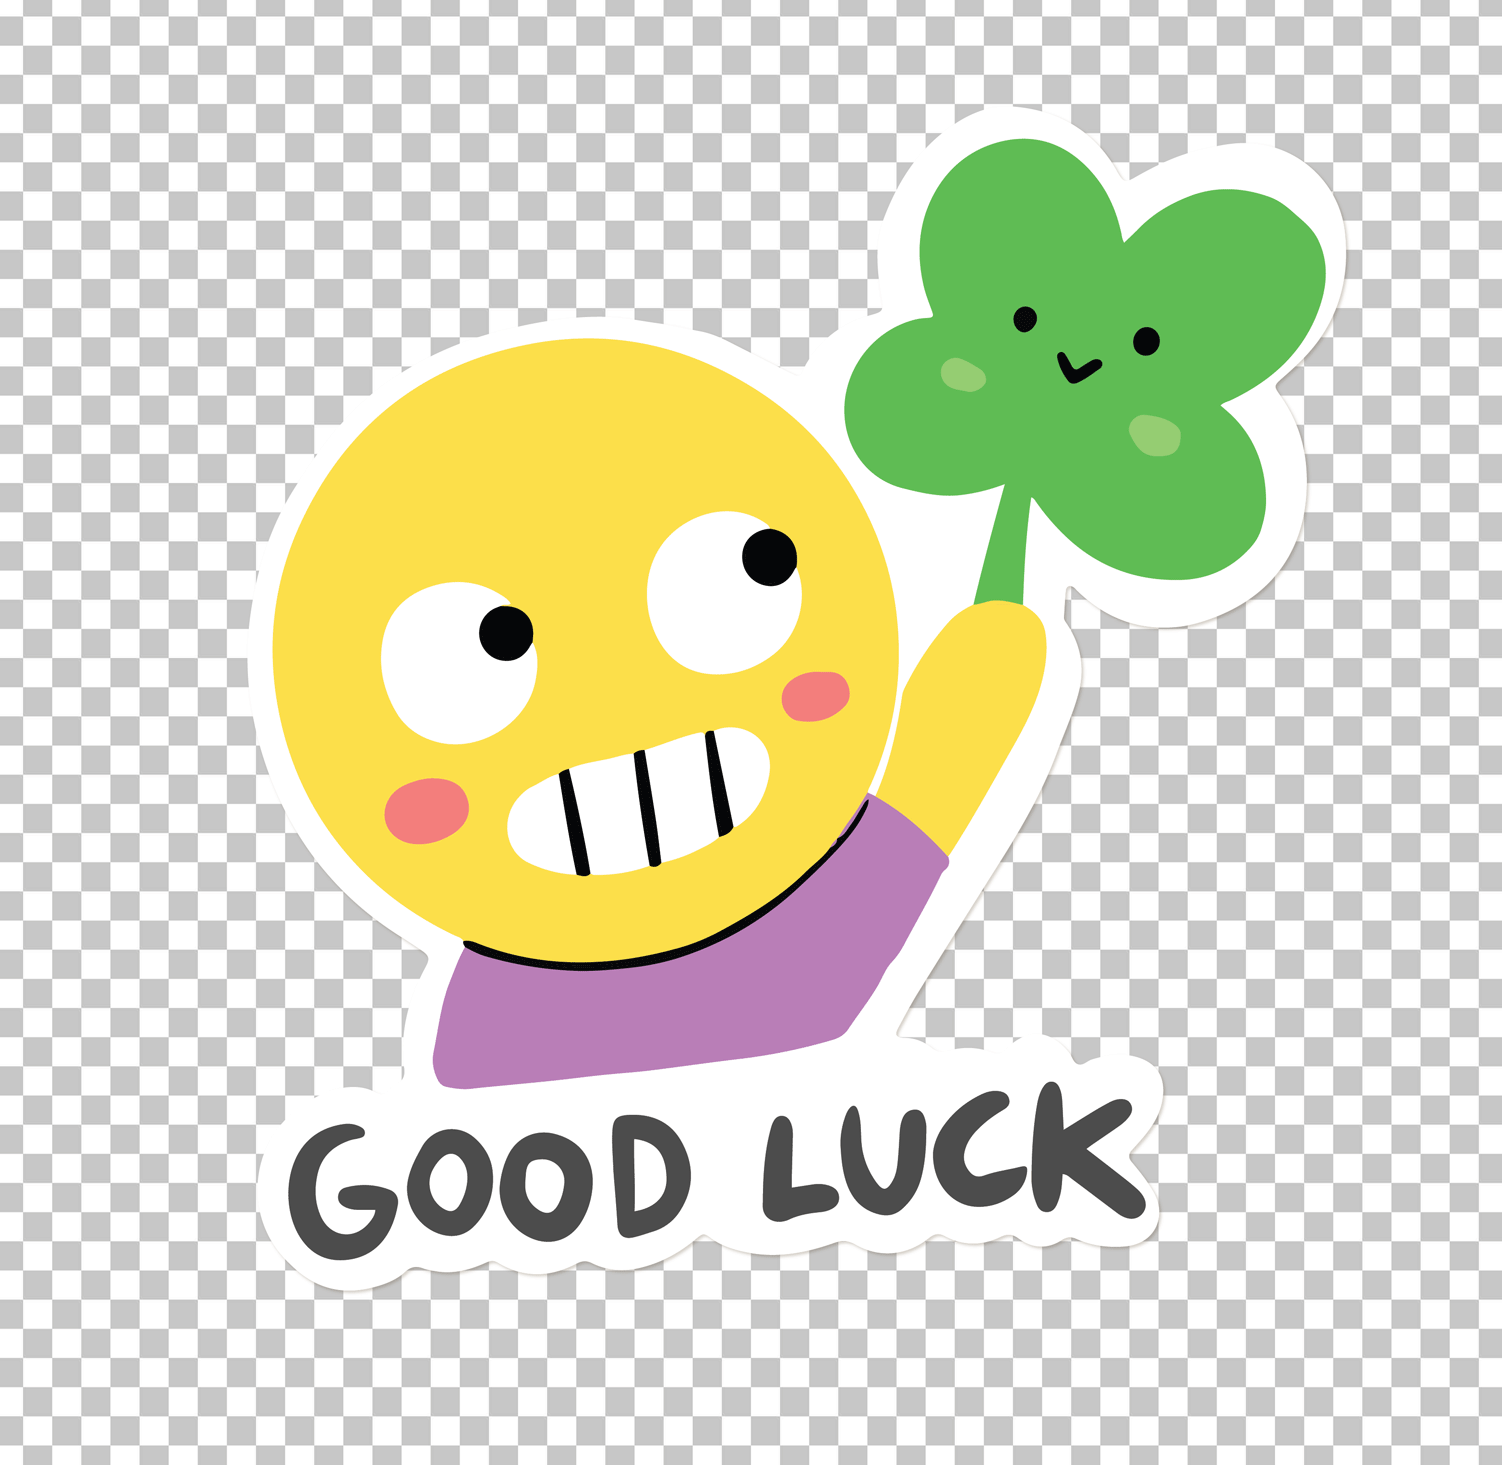 Cartoon smiley face holding a four-leaf clover, good luck message Sticker PNG Image.